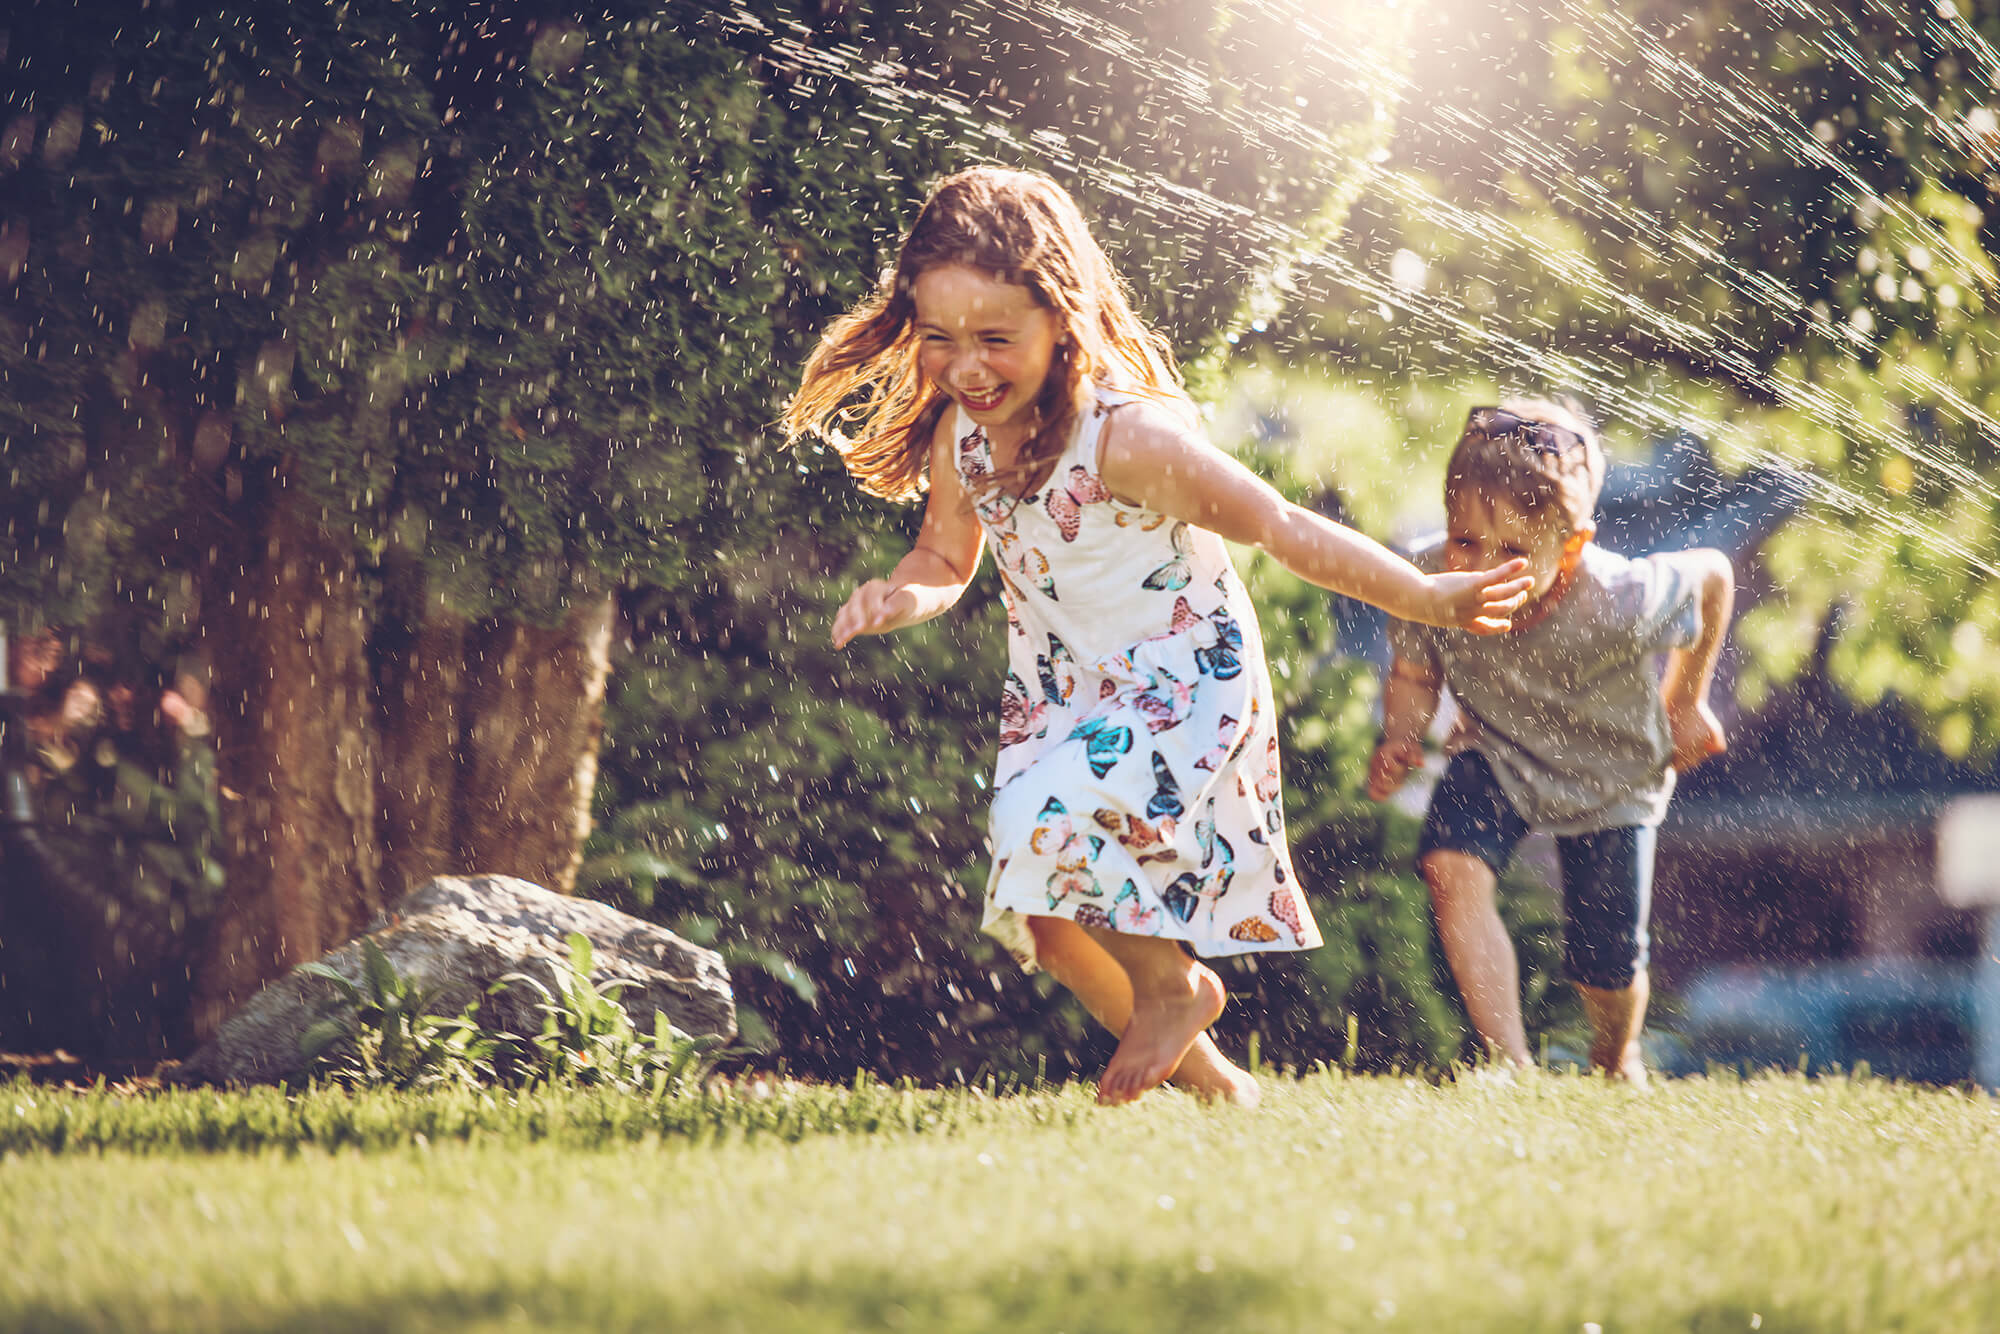 a young boy and girl running through a sprinkler on a lawn